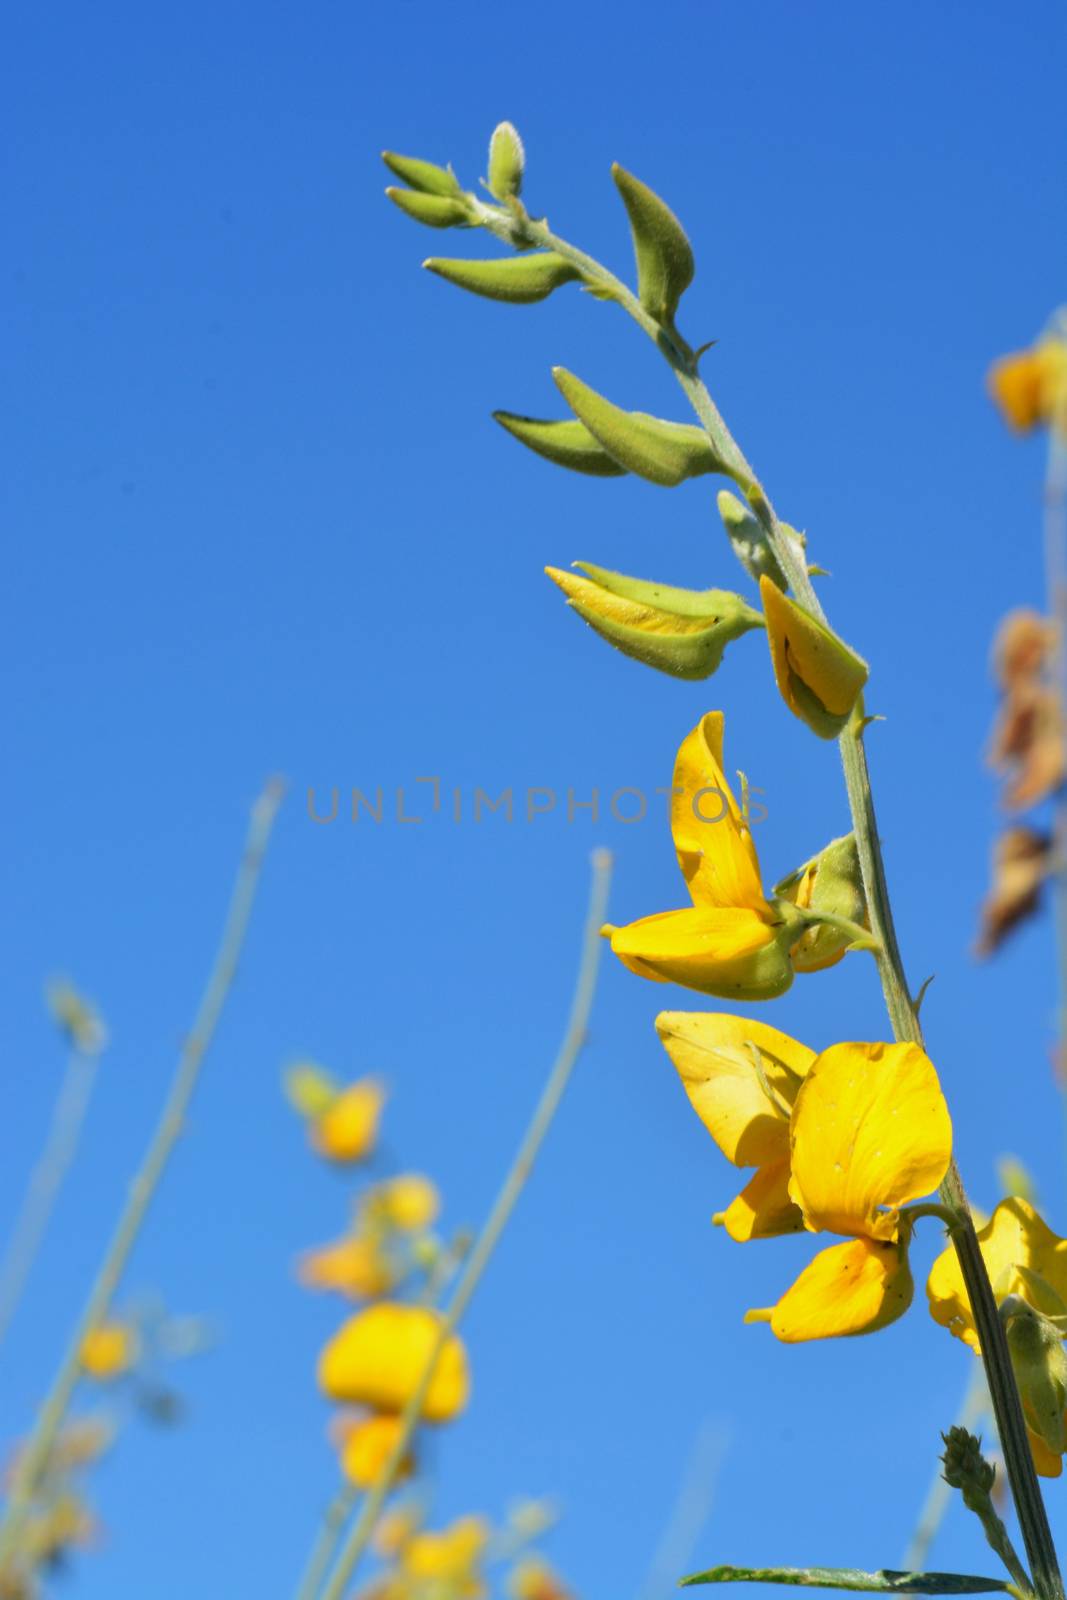 Close up Blooming yellow Sunn hemp flowers or Crotalaria juncea is a tropical Asian plant used for green manure forage, organic soil building and cover crop applications